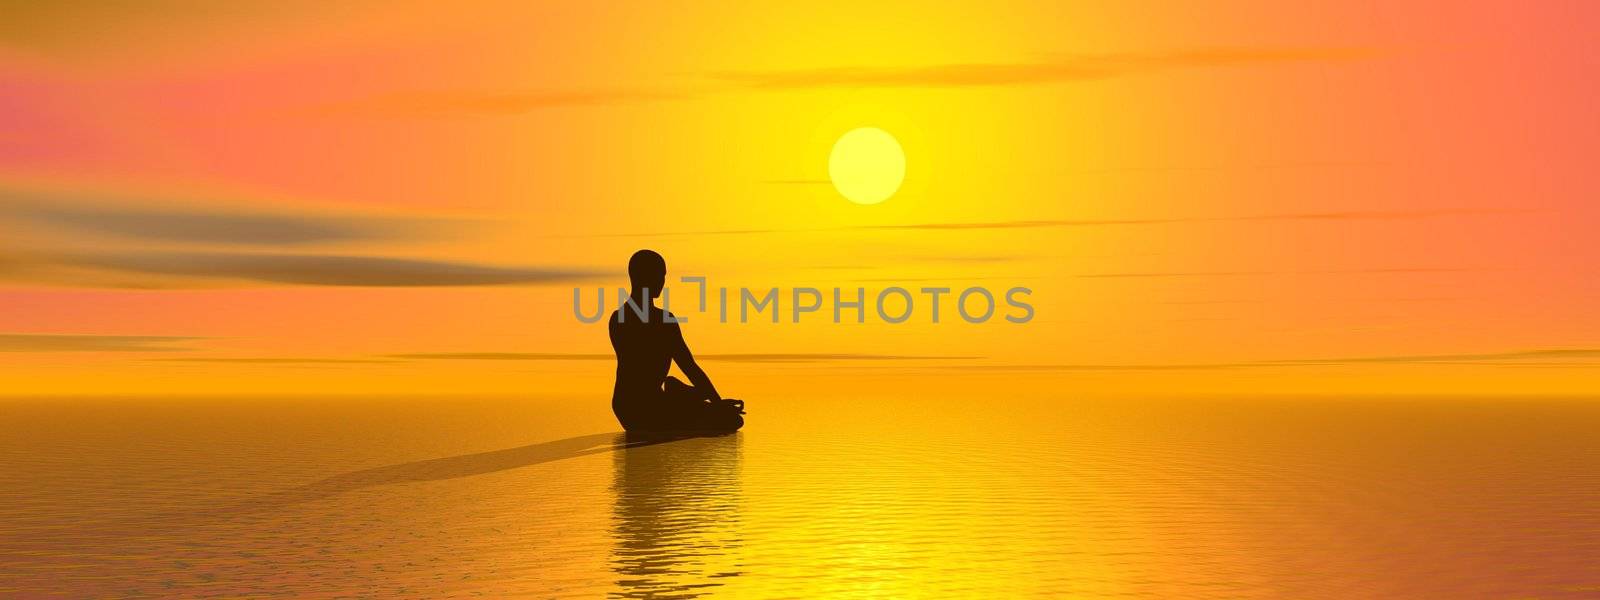 Man meditating in front of the sun and upon the ocean by beautiful sunset